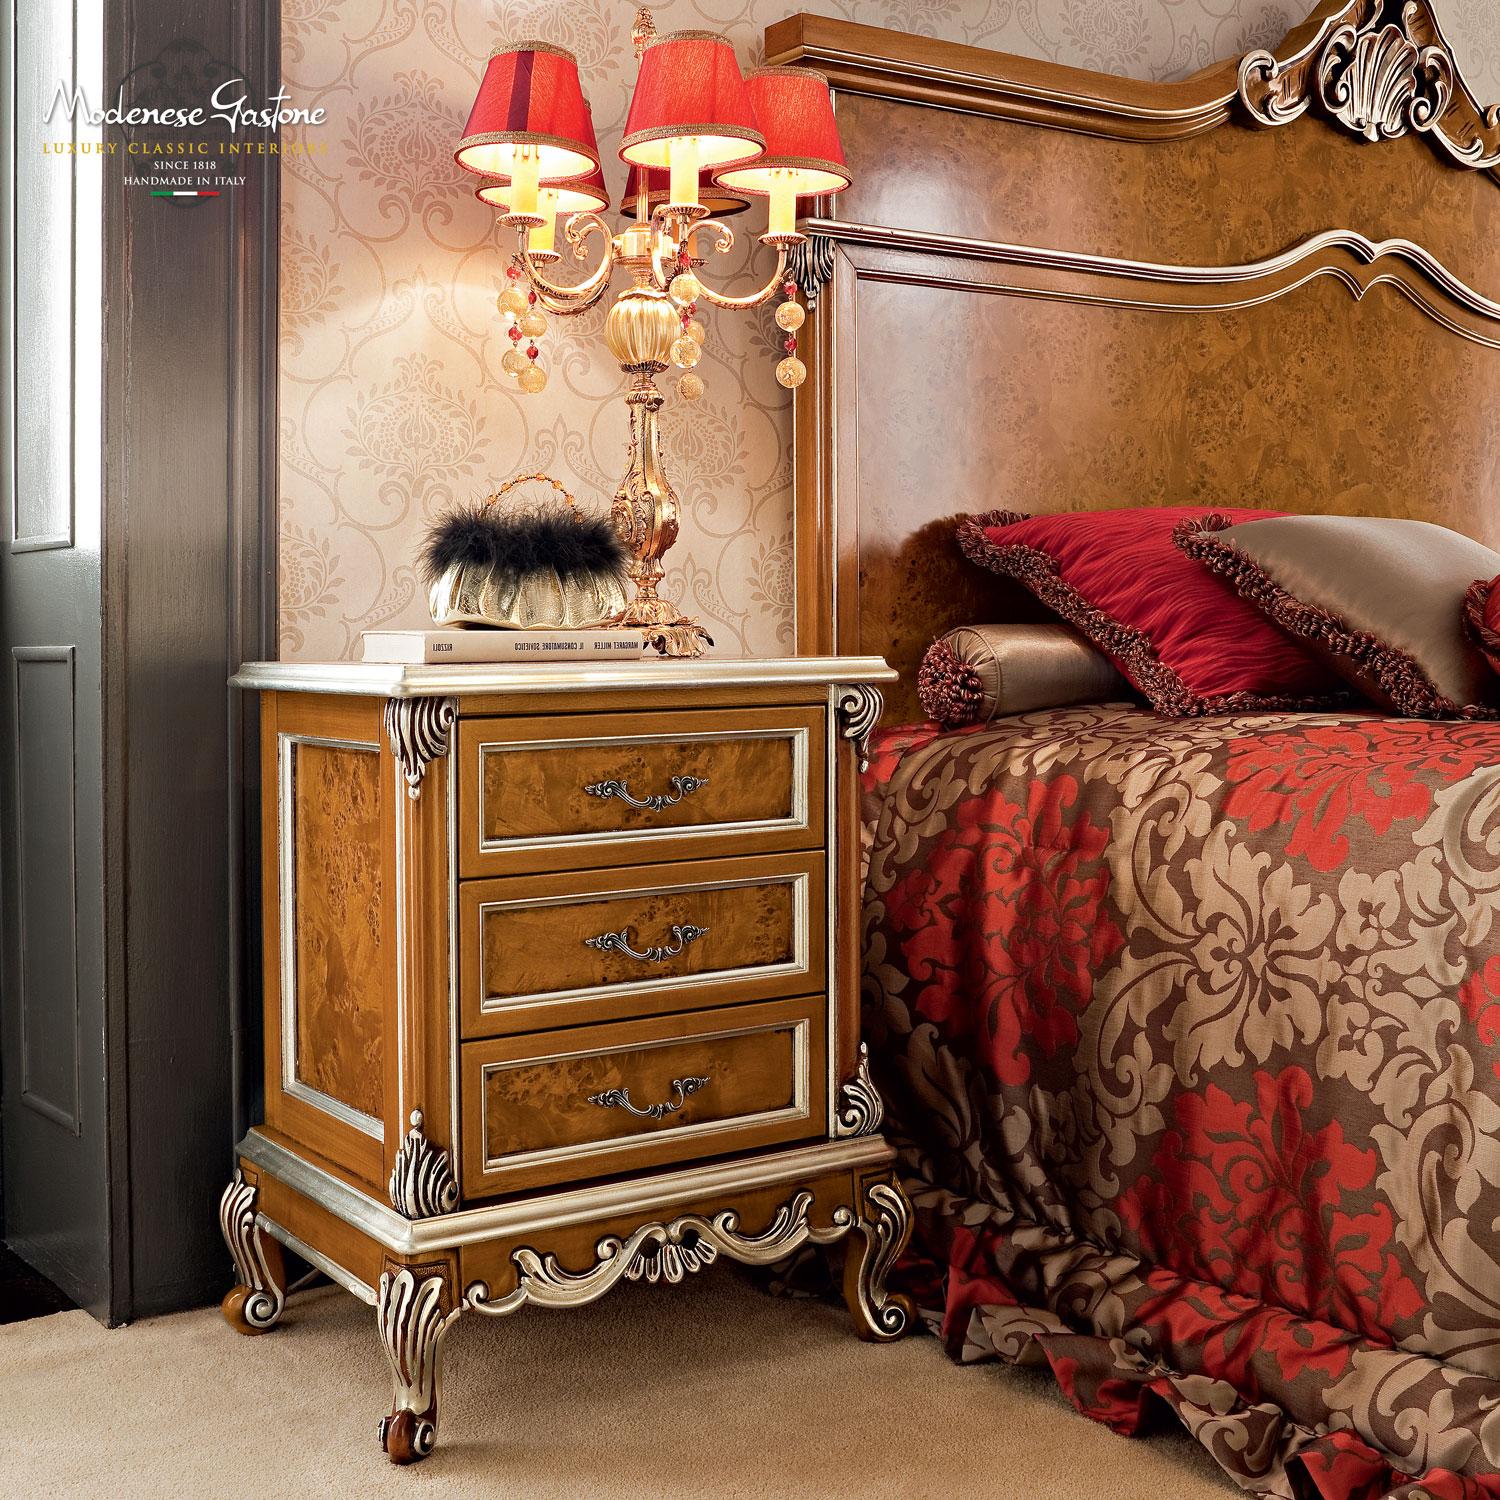 Breathtaking baroque night stand with radica panels by Modenese Gastone Interiors. The natural wood structure and the carved details contribute to the harmonious movement of the overall design, which is great in classic-style bedrooms with